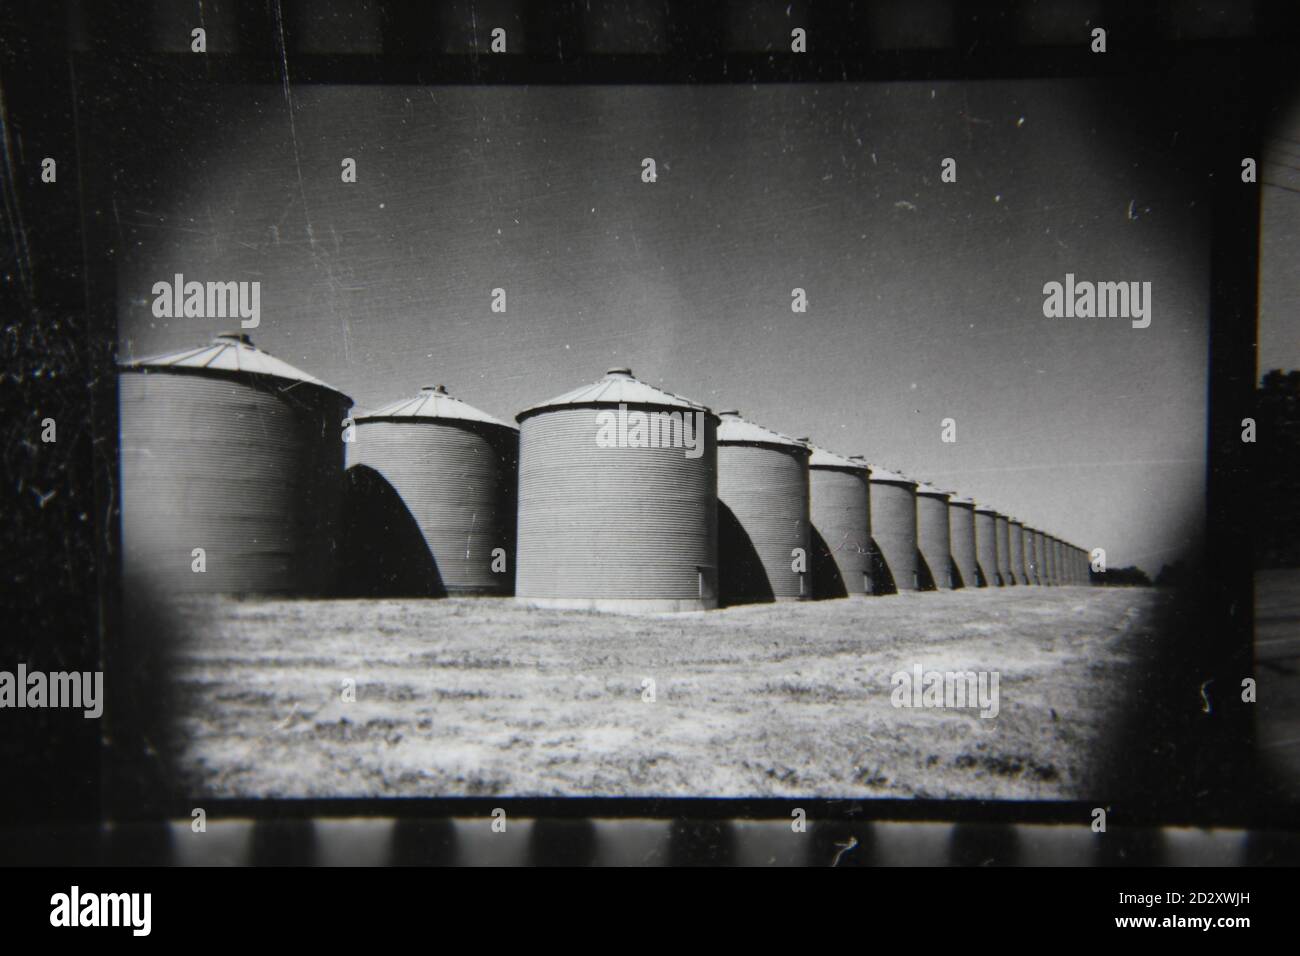 Fine 1970s vintage black and white photography of a row of huge storage silos. Stock Photo